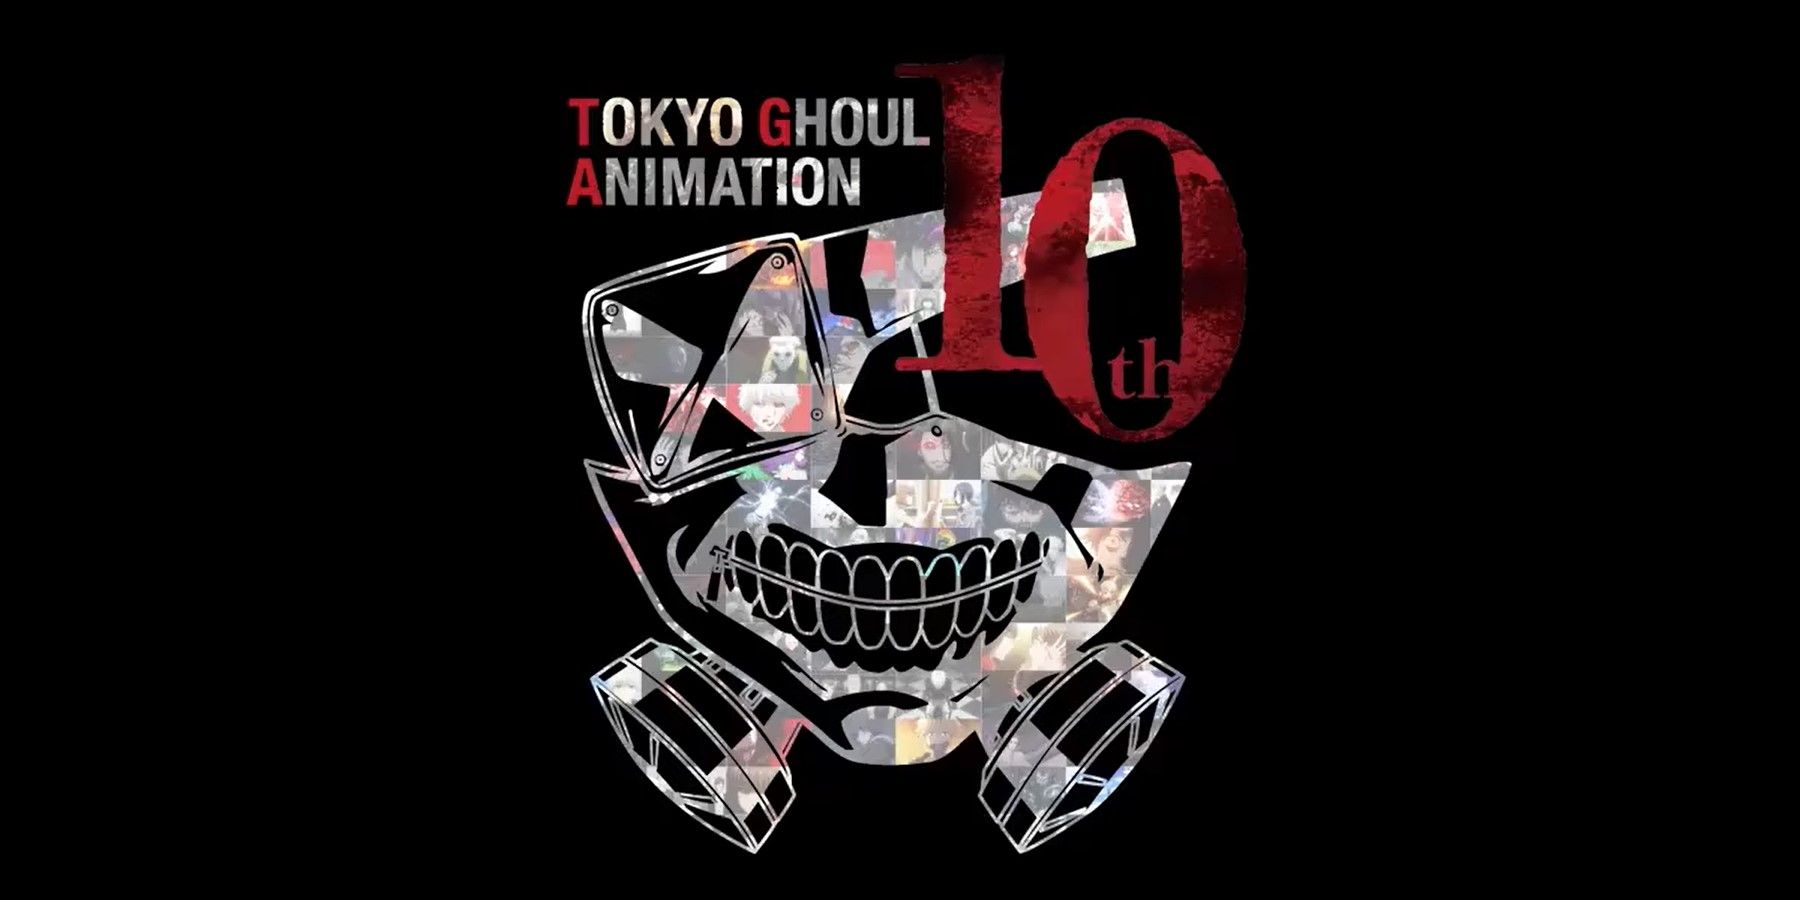 Tokyo Ghoul Anime 10th Anniversary